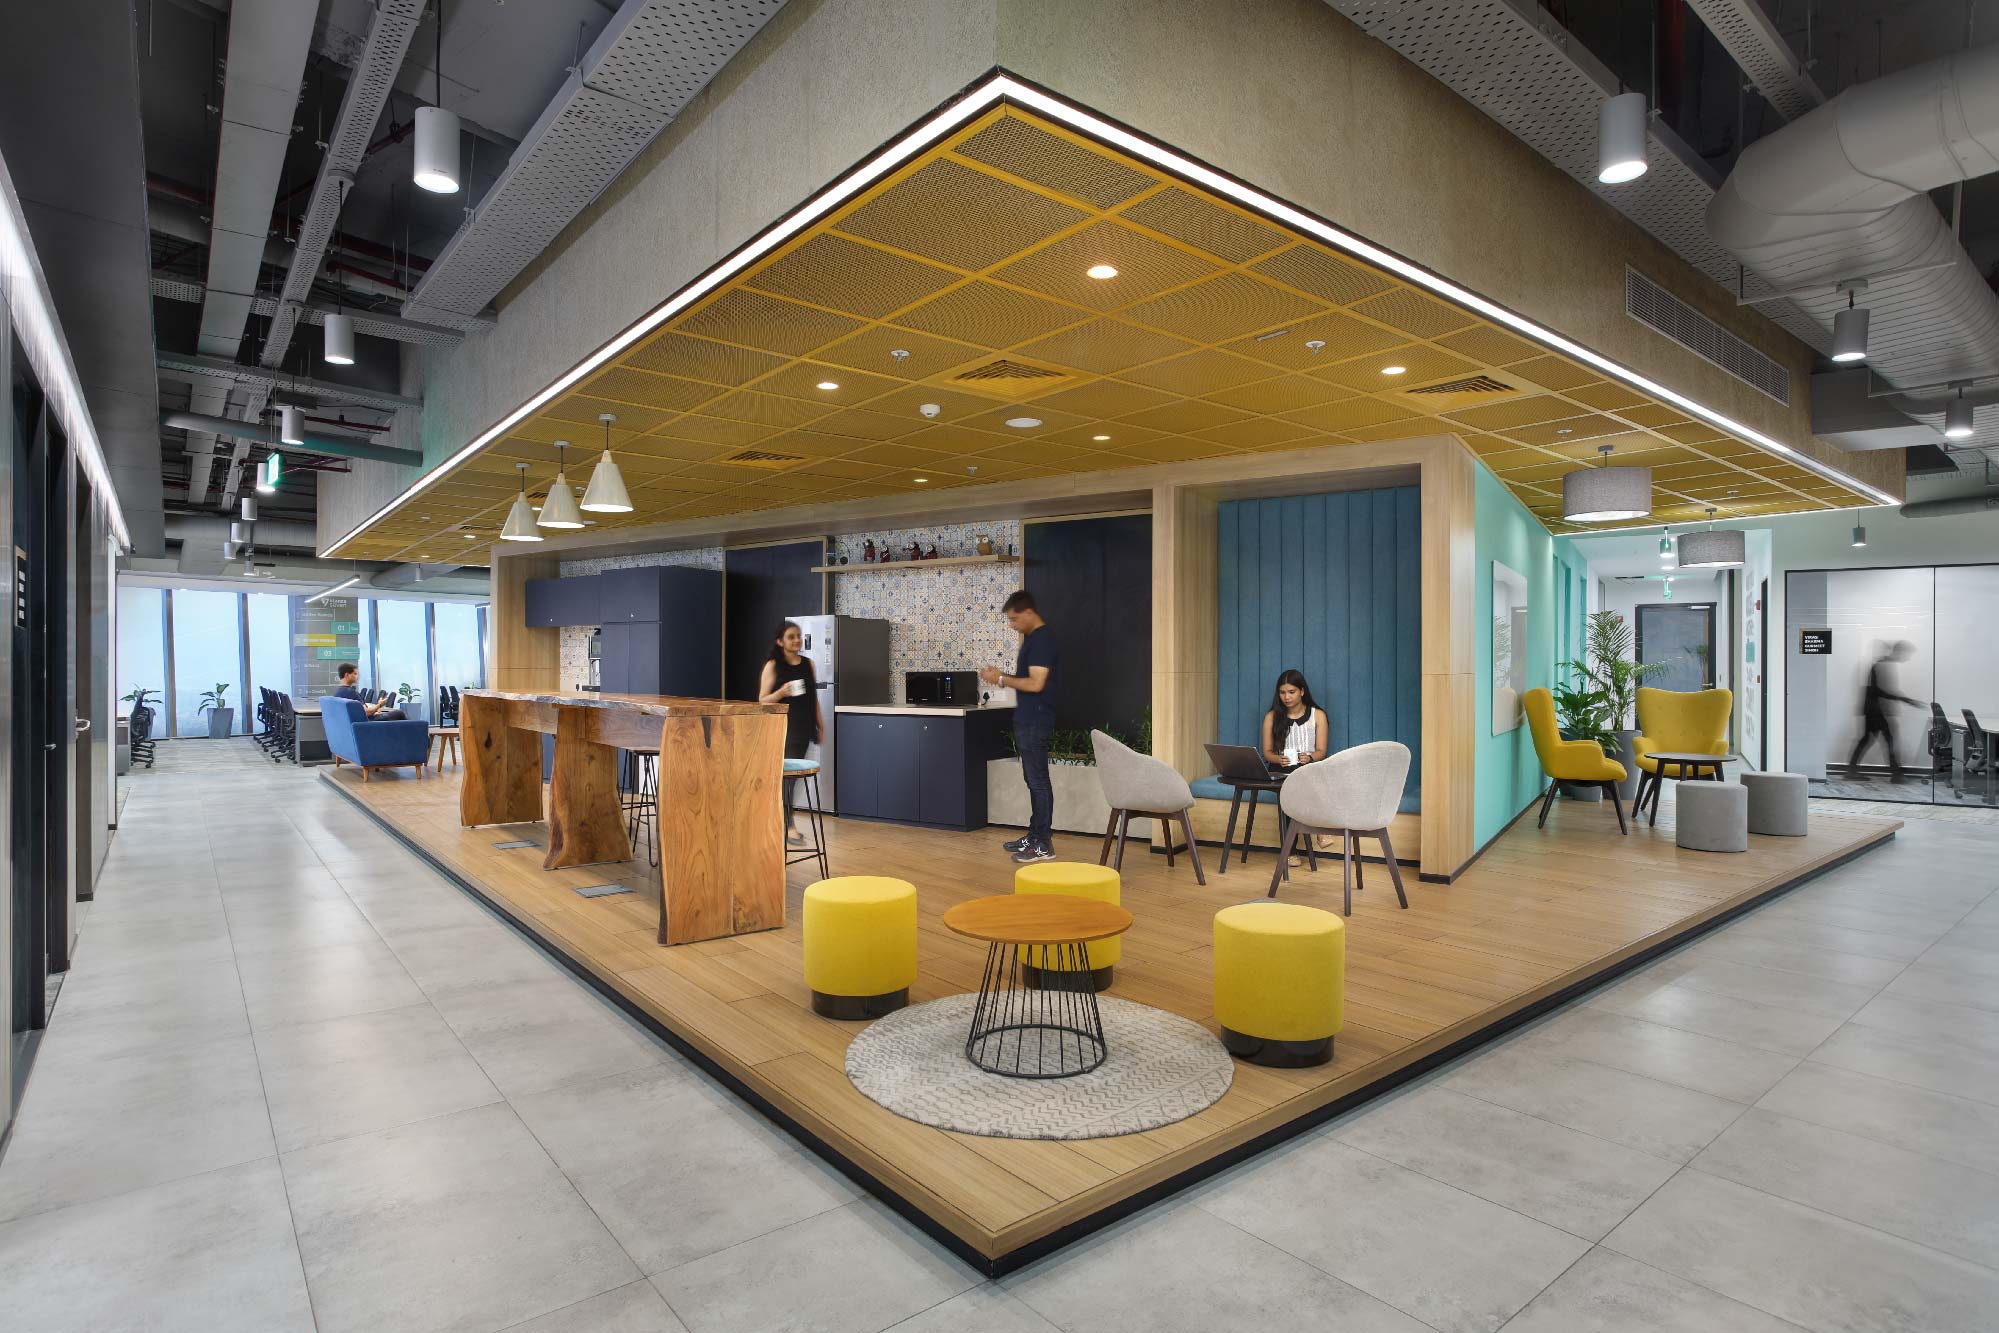 Taikoo Li Qiantan - spaces for work and relaxation